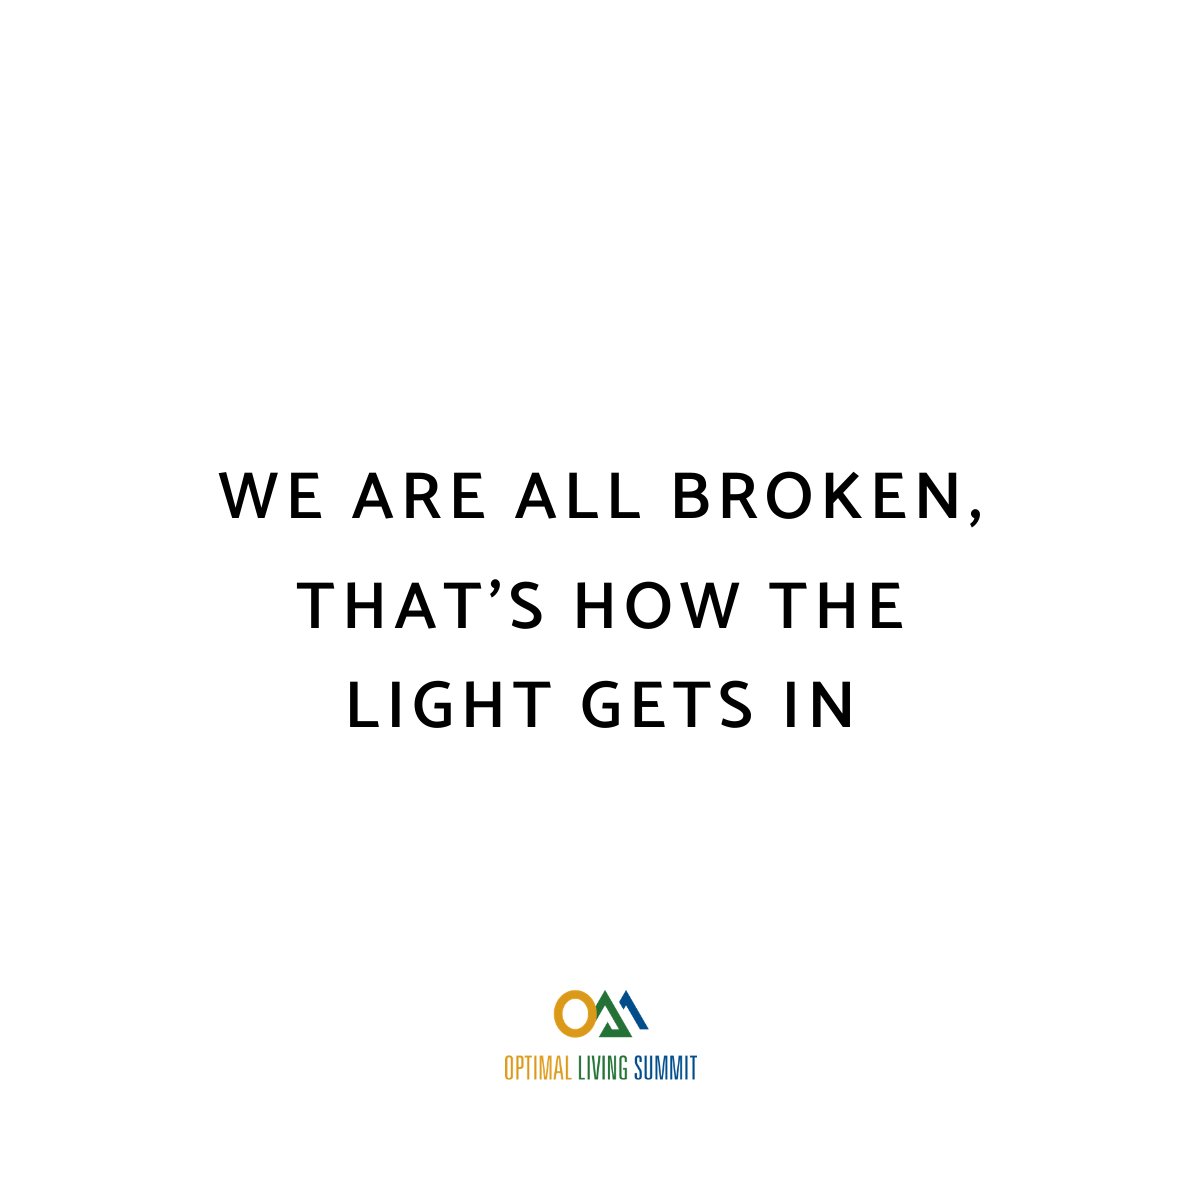 'We are all broken, that's how the light gets in' ✨ 

#olsquote #quoteoftheday #mentalhealthquotes #ols #quotesaboutgrowth #mindsetquotes #dailymantra #mantra #healingjourney #wellnessjourney #healthandwellness #optimallivingquotes #optimalliving #optimallivingsummit